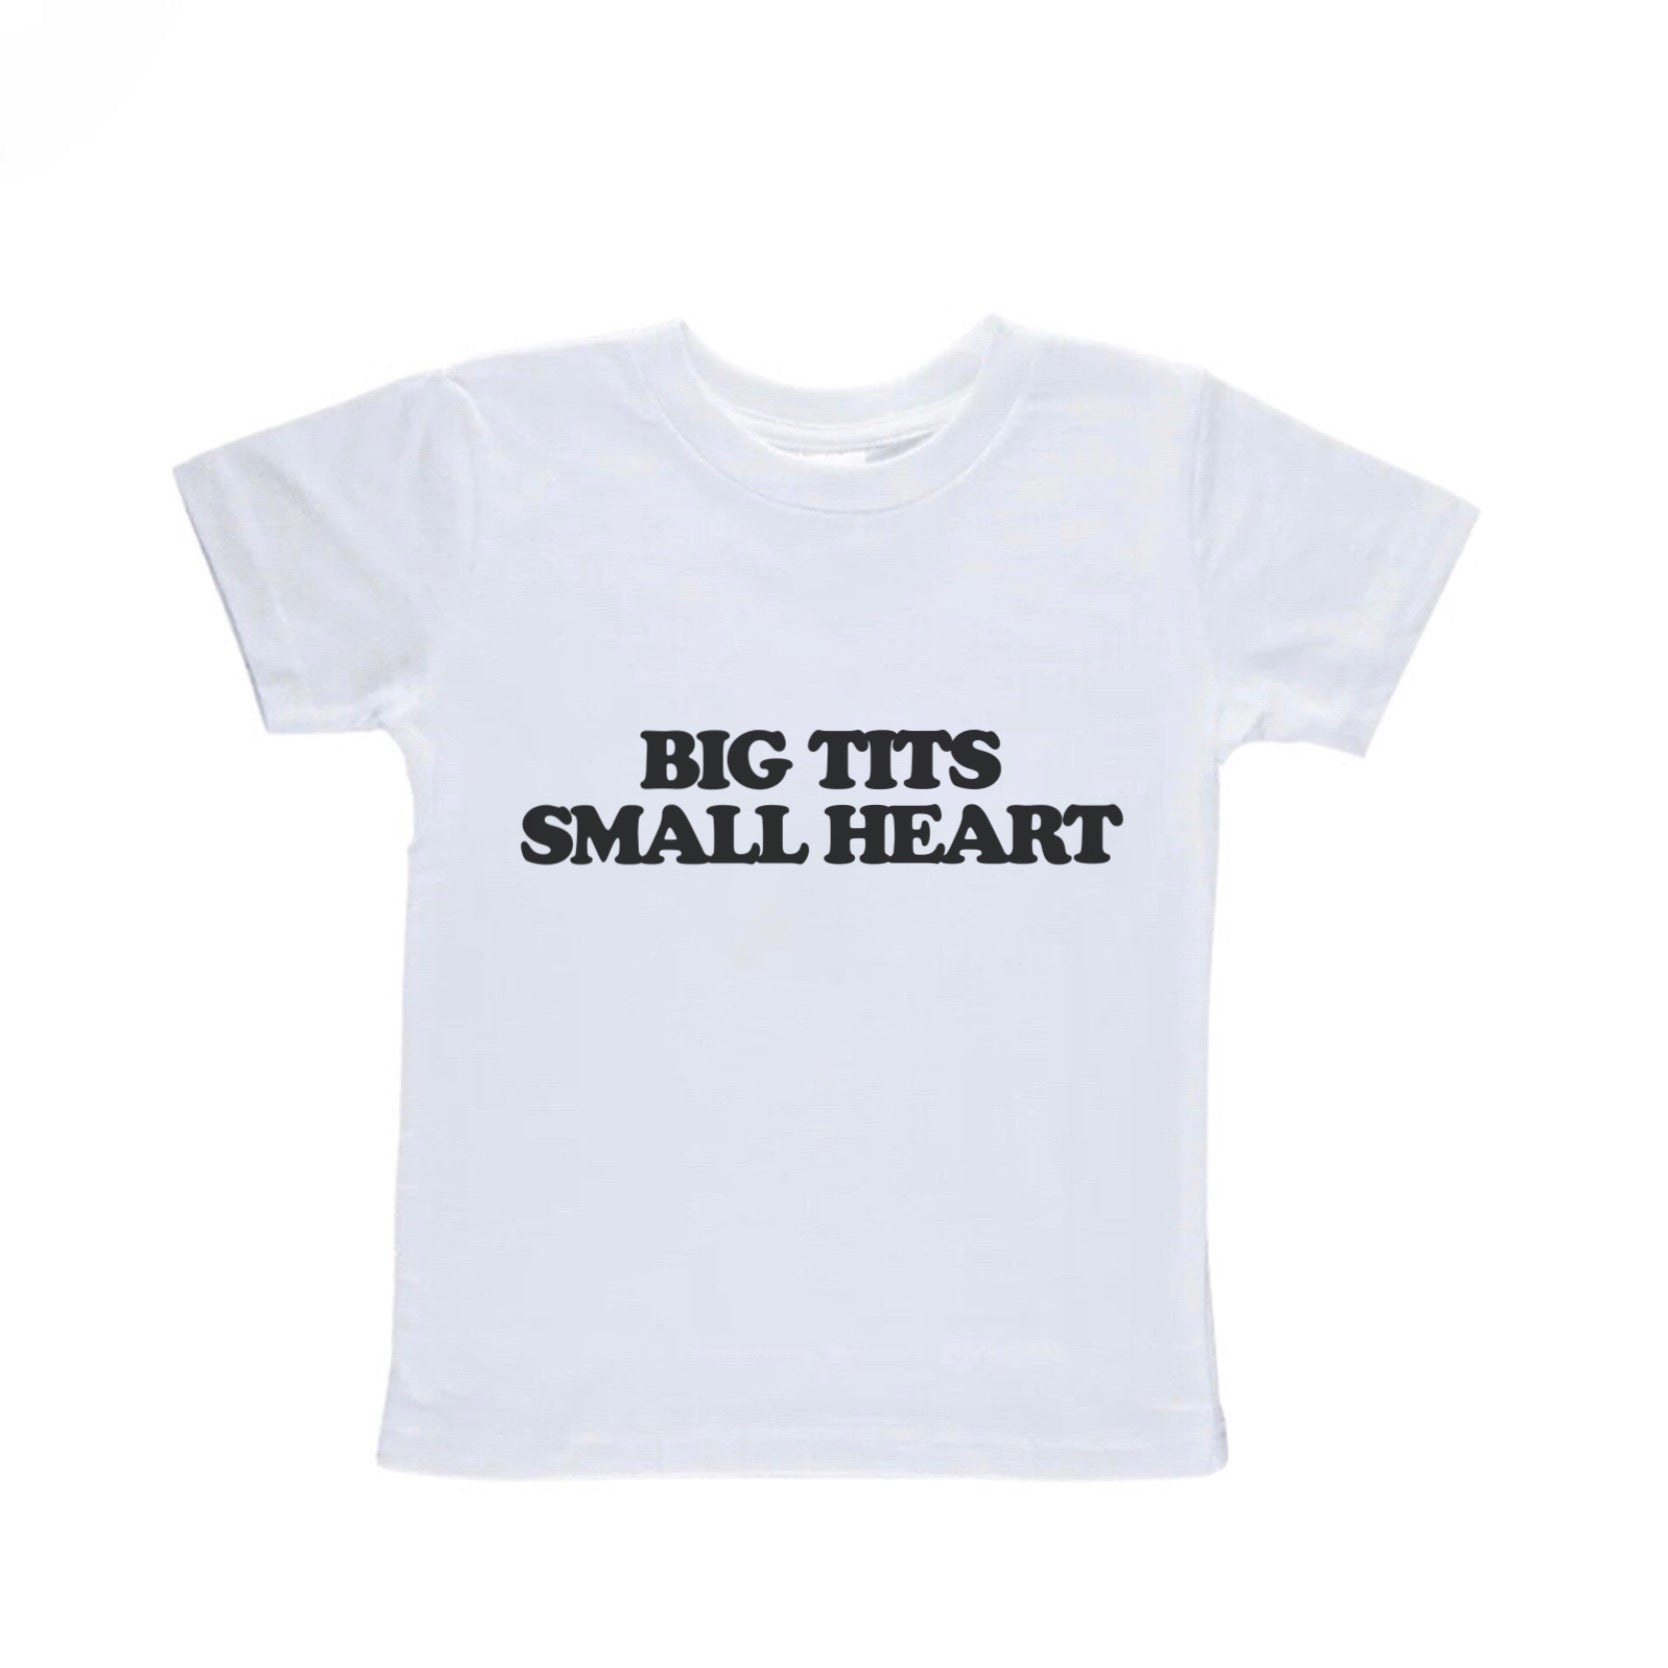 Big Tits Small Heart Baby Tee – Offensiveclothing